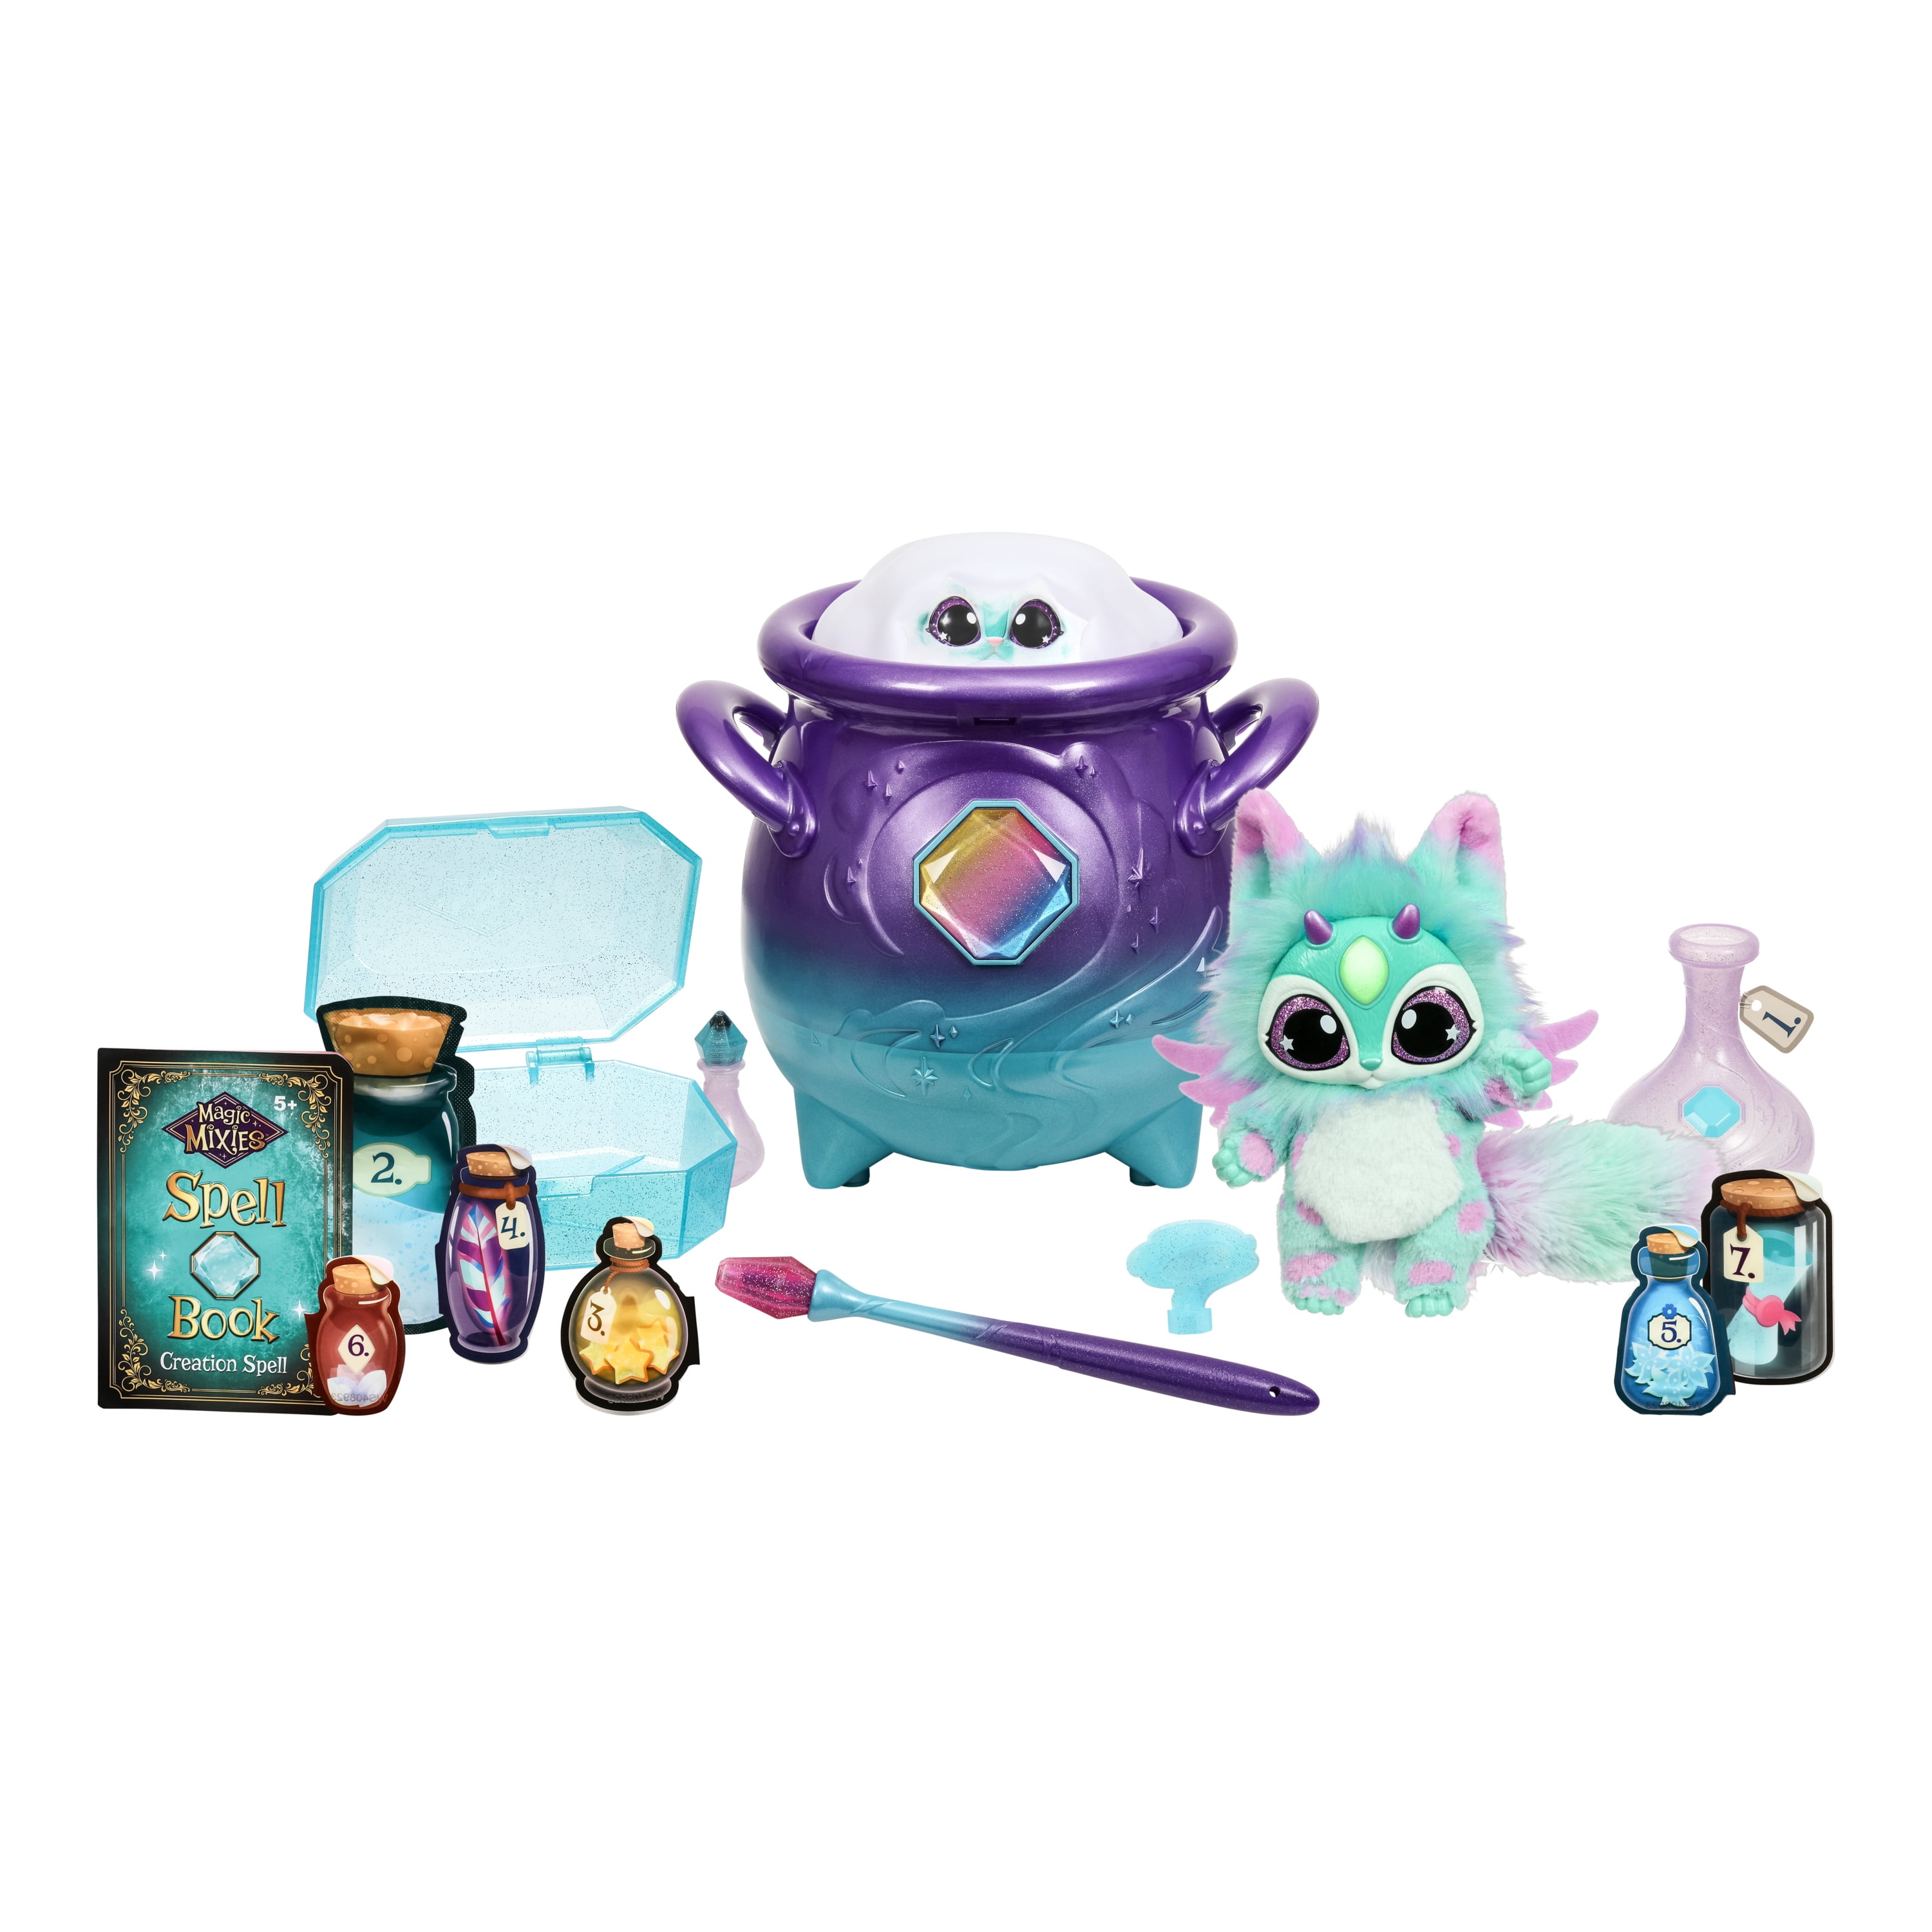 Magic Mixies Magical Real Misting Purple Cauldron with Interactive 8 Blue  and Plush Toy, Ages 5+